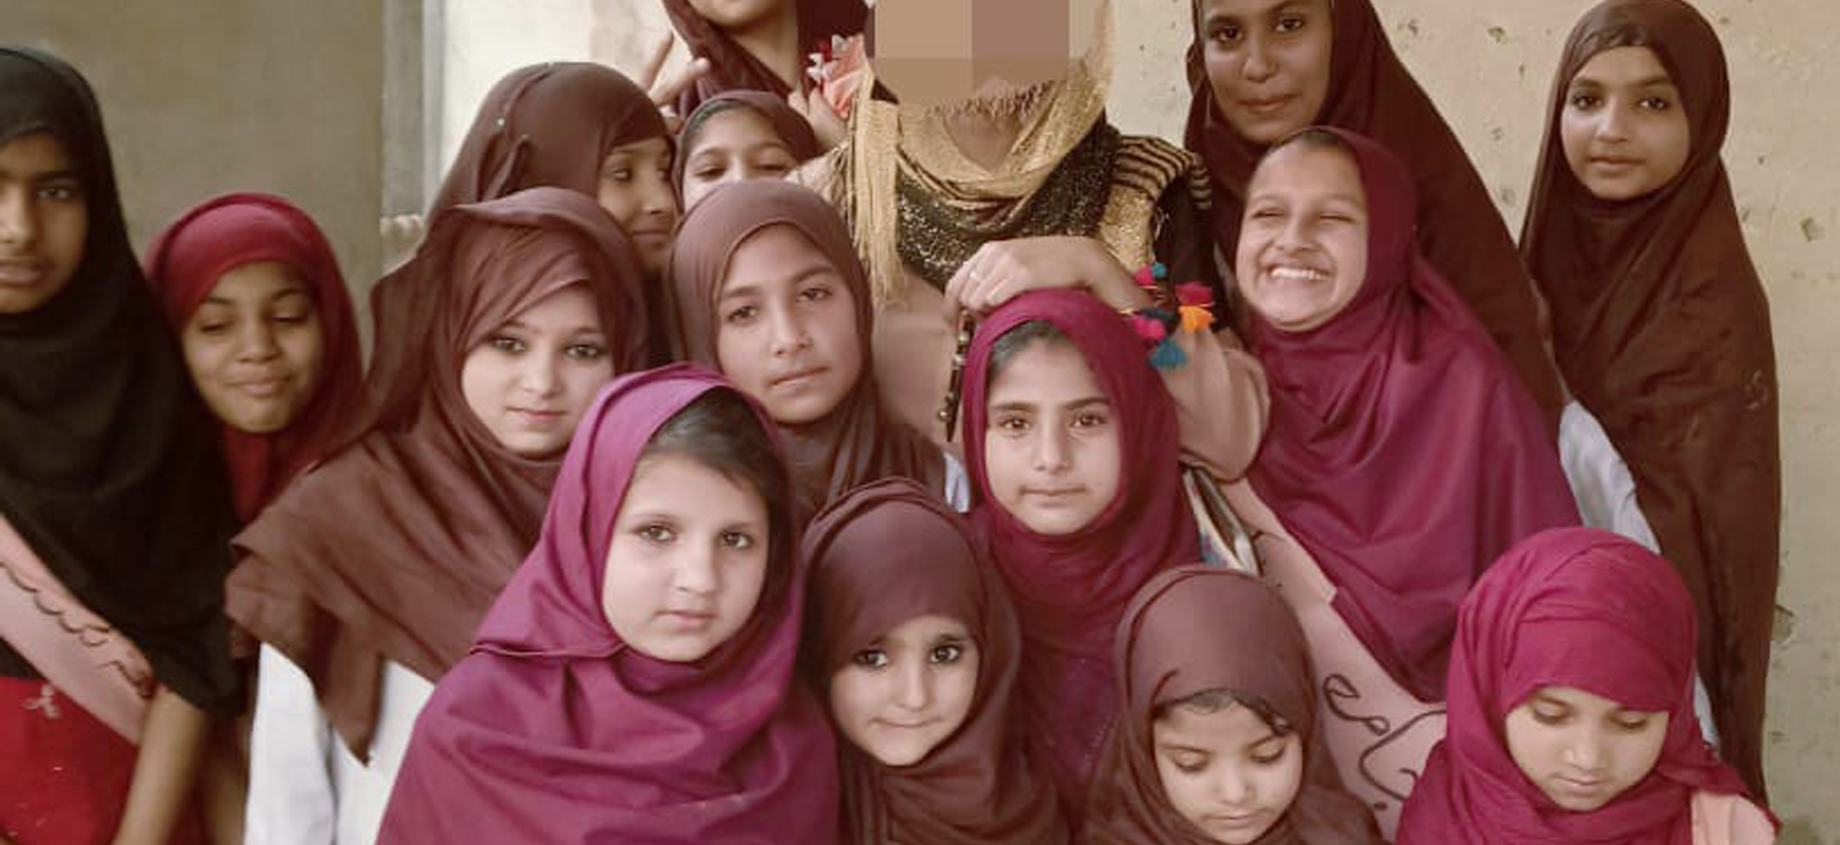 Join us in our mission to provide quality education for underprivileged children in Pakistan